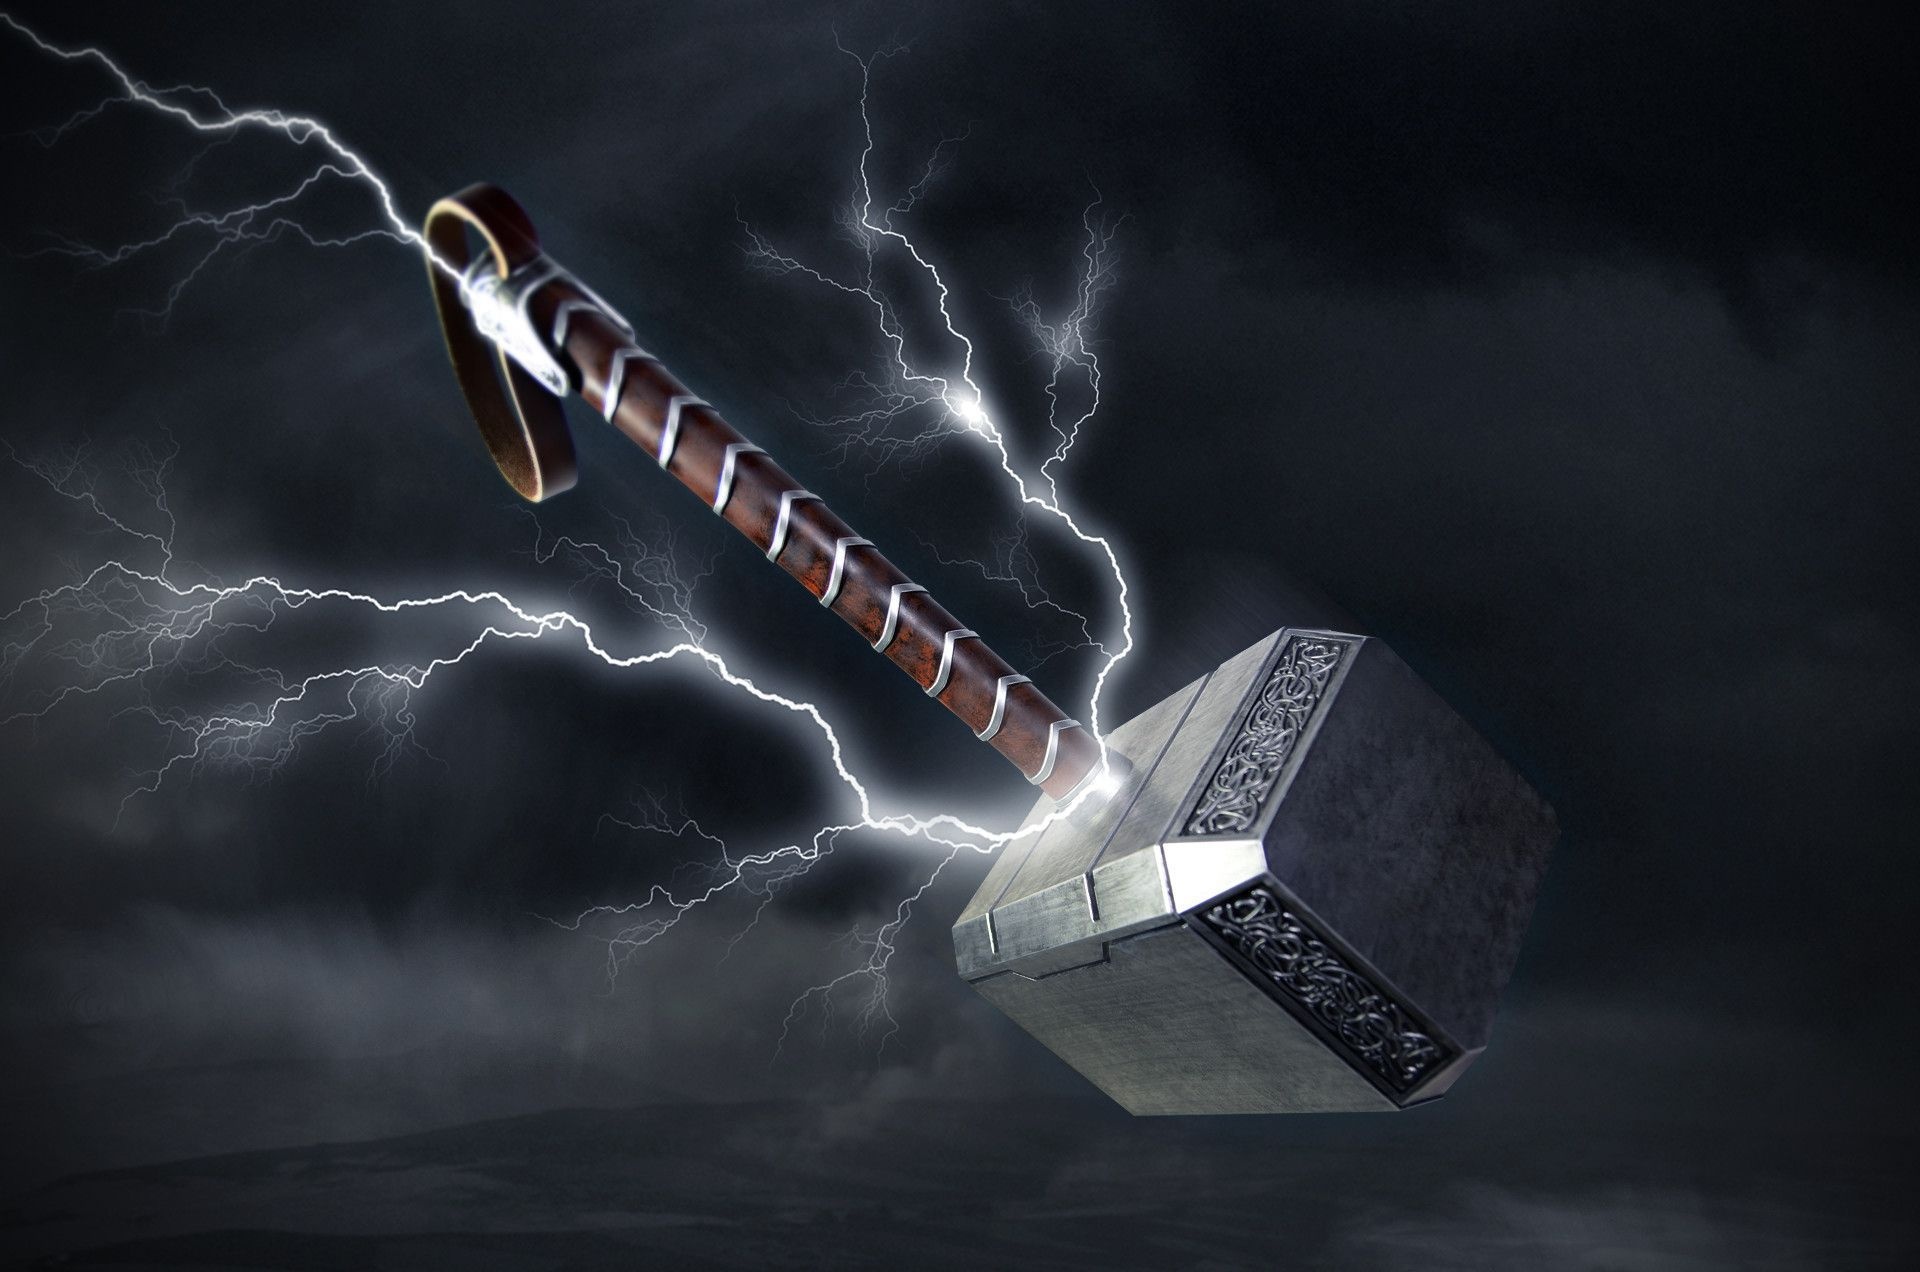 Thor with Mjolnir, Hammer wallpapers, Asgardian power, Godly weapon, 1920x1280 HD Desktop